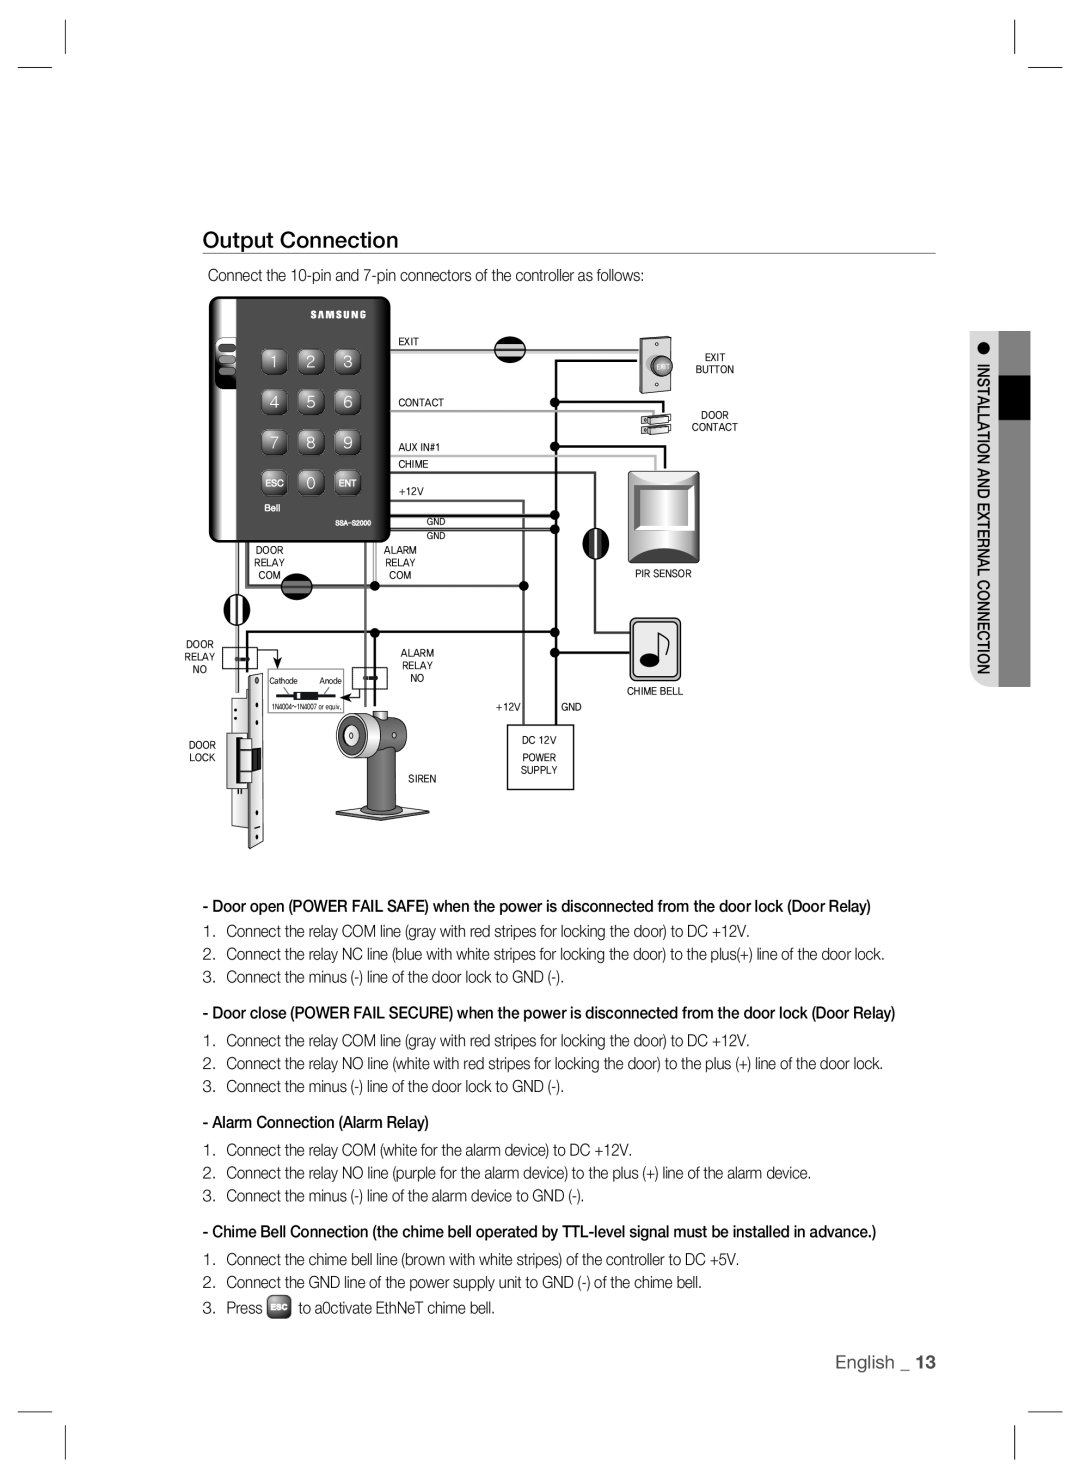 Samsung SSA-S2000W user manual Output Connection, English 